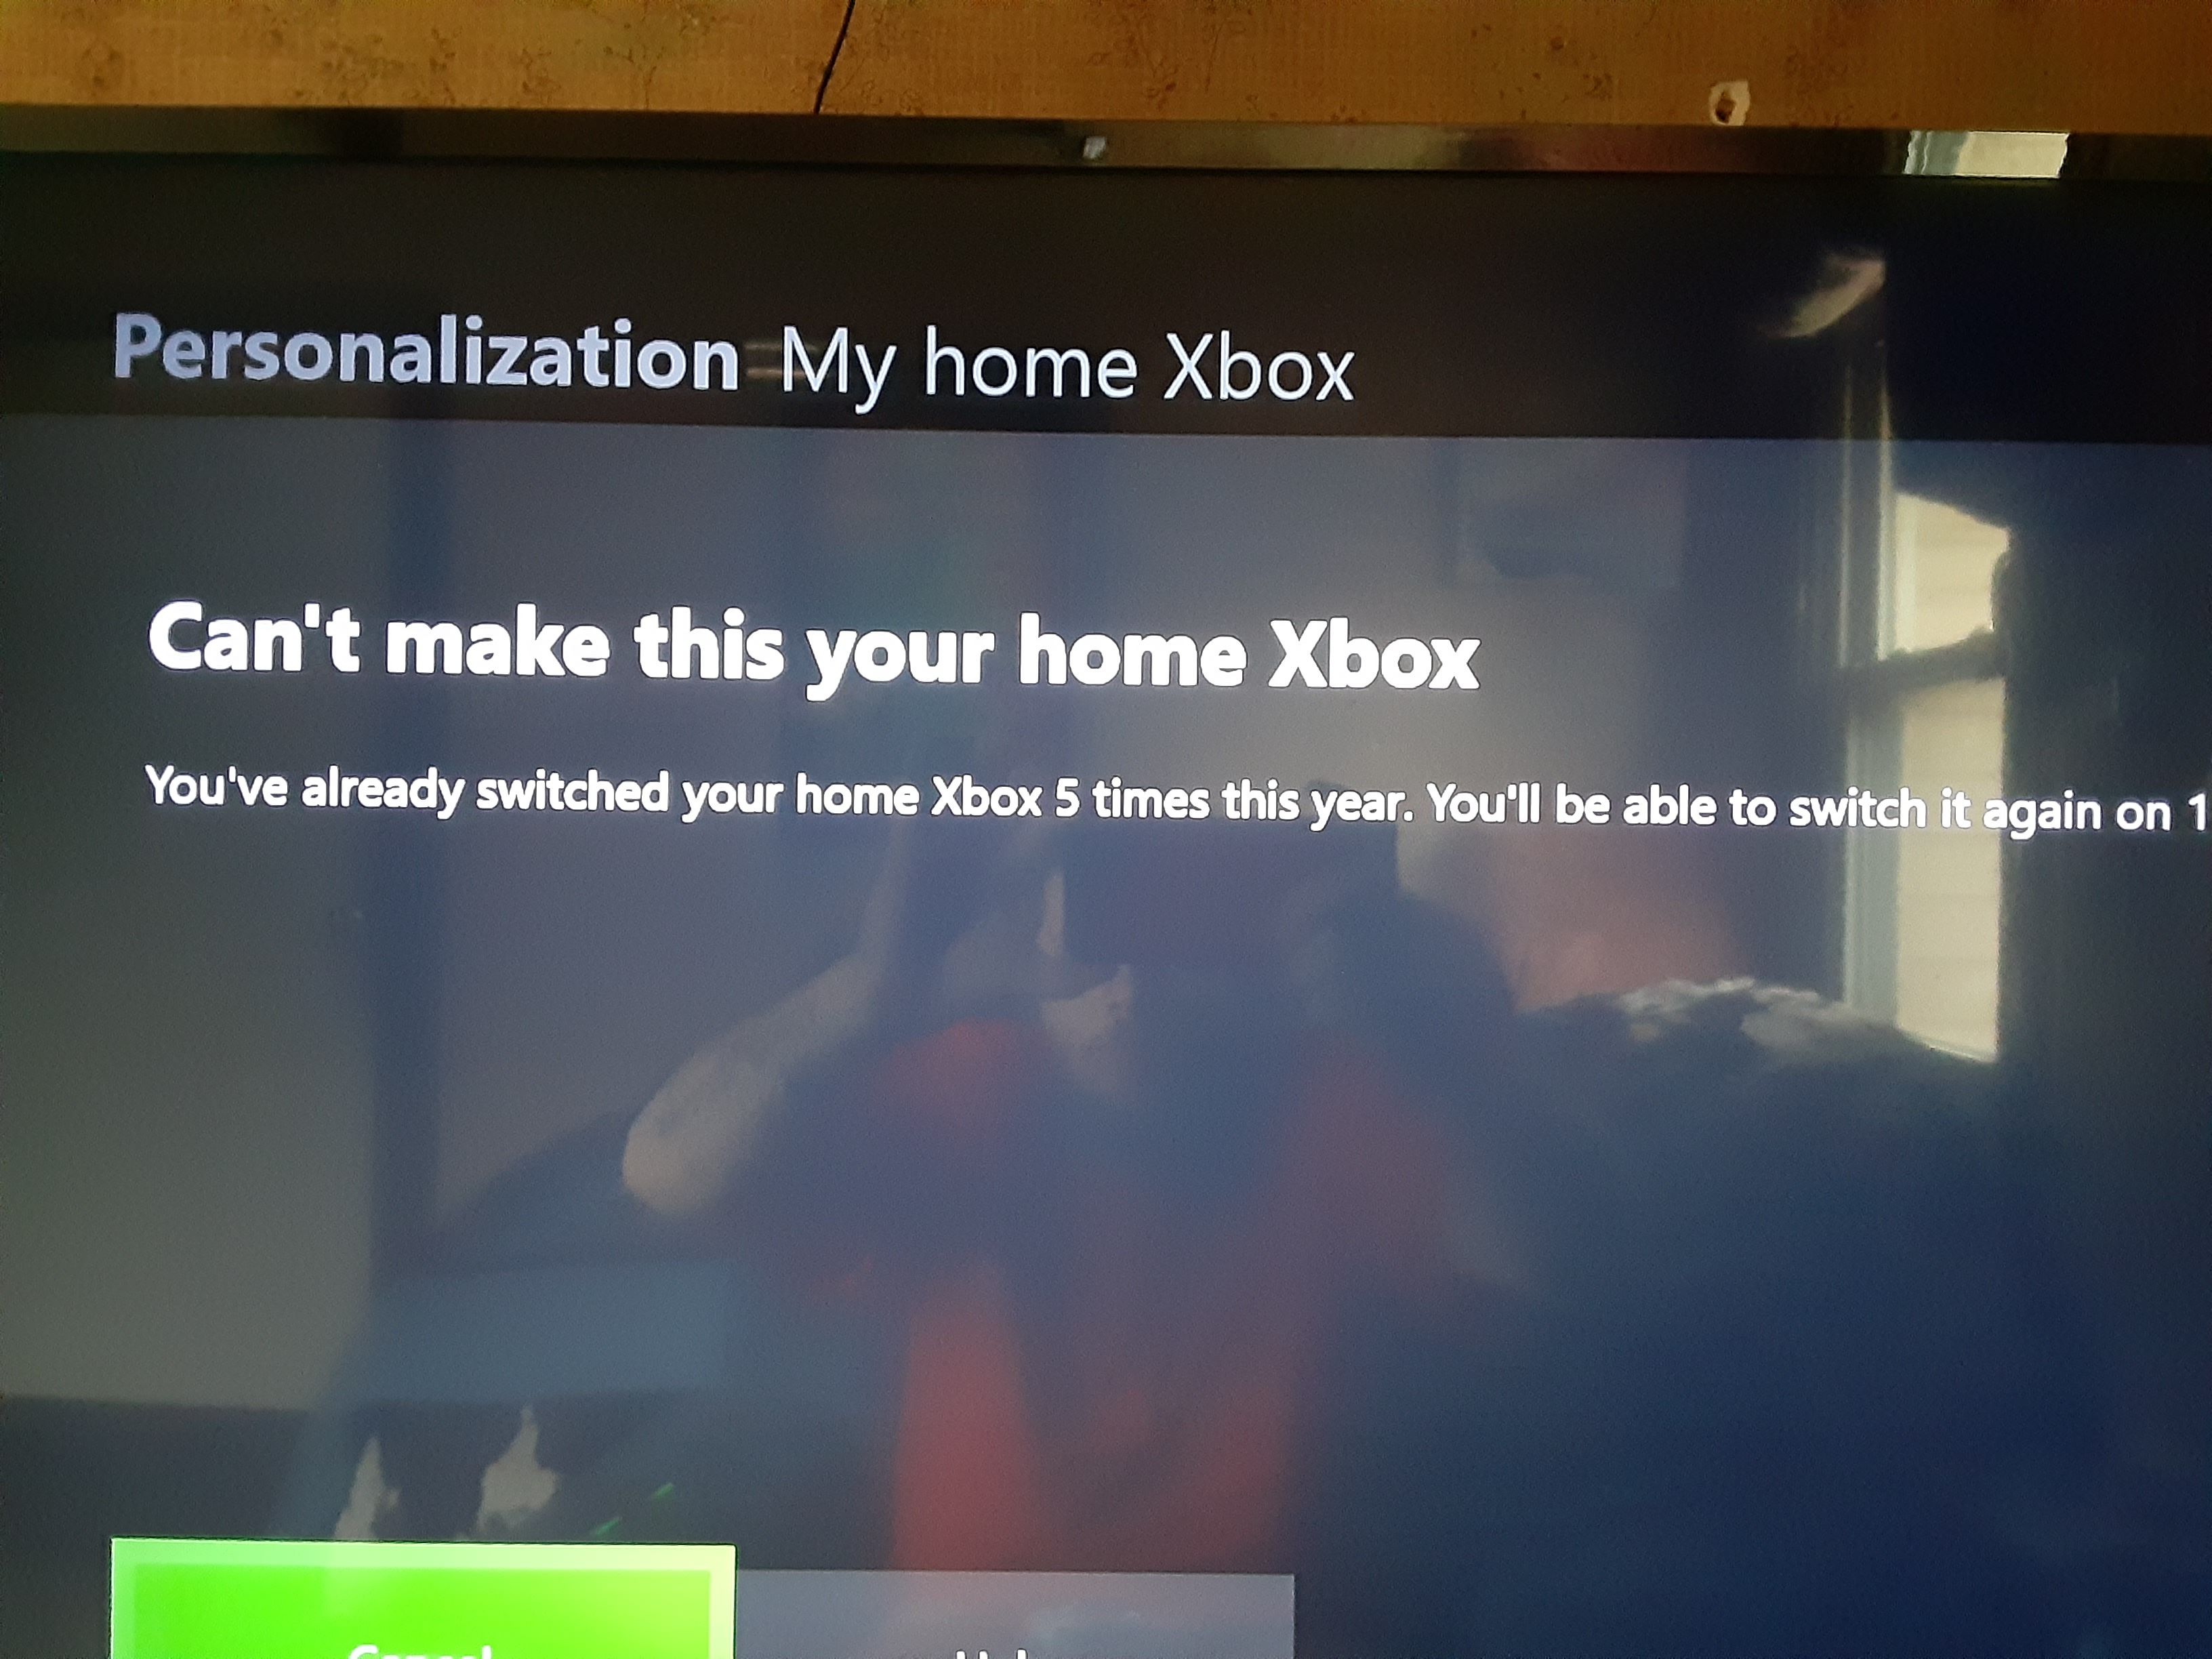 how to make my home xbox after 5 times